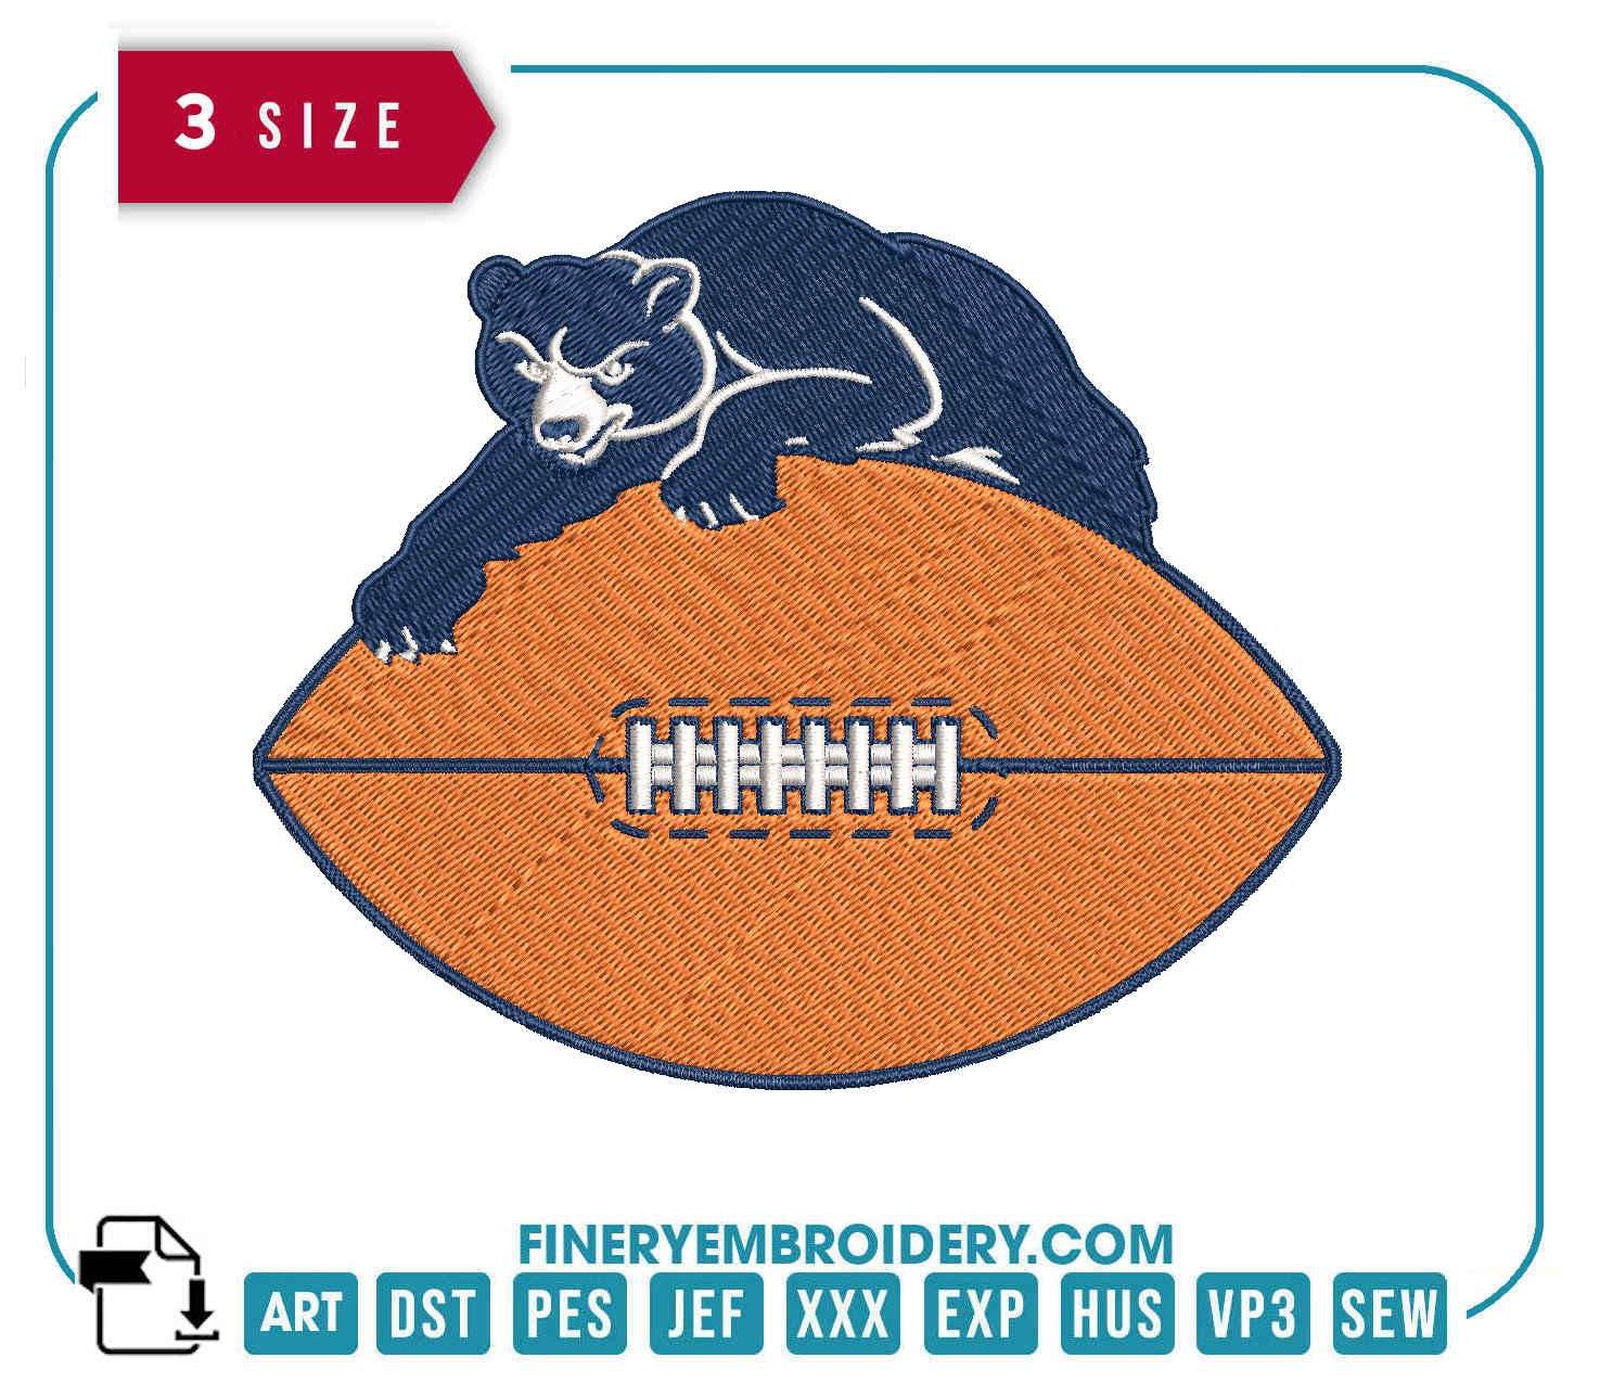 Chicago Bears Embroidery Design 9 - FineryEmbroidery